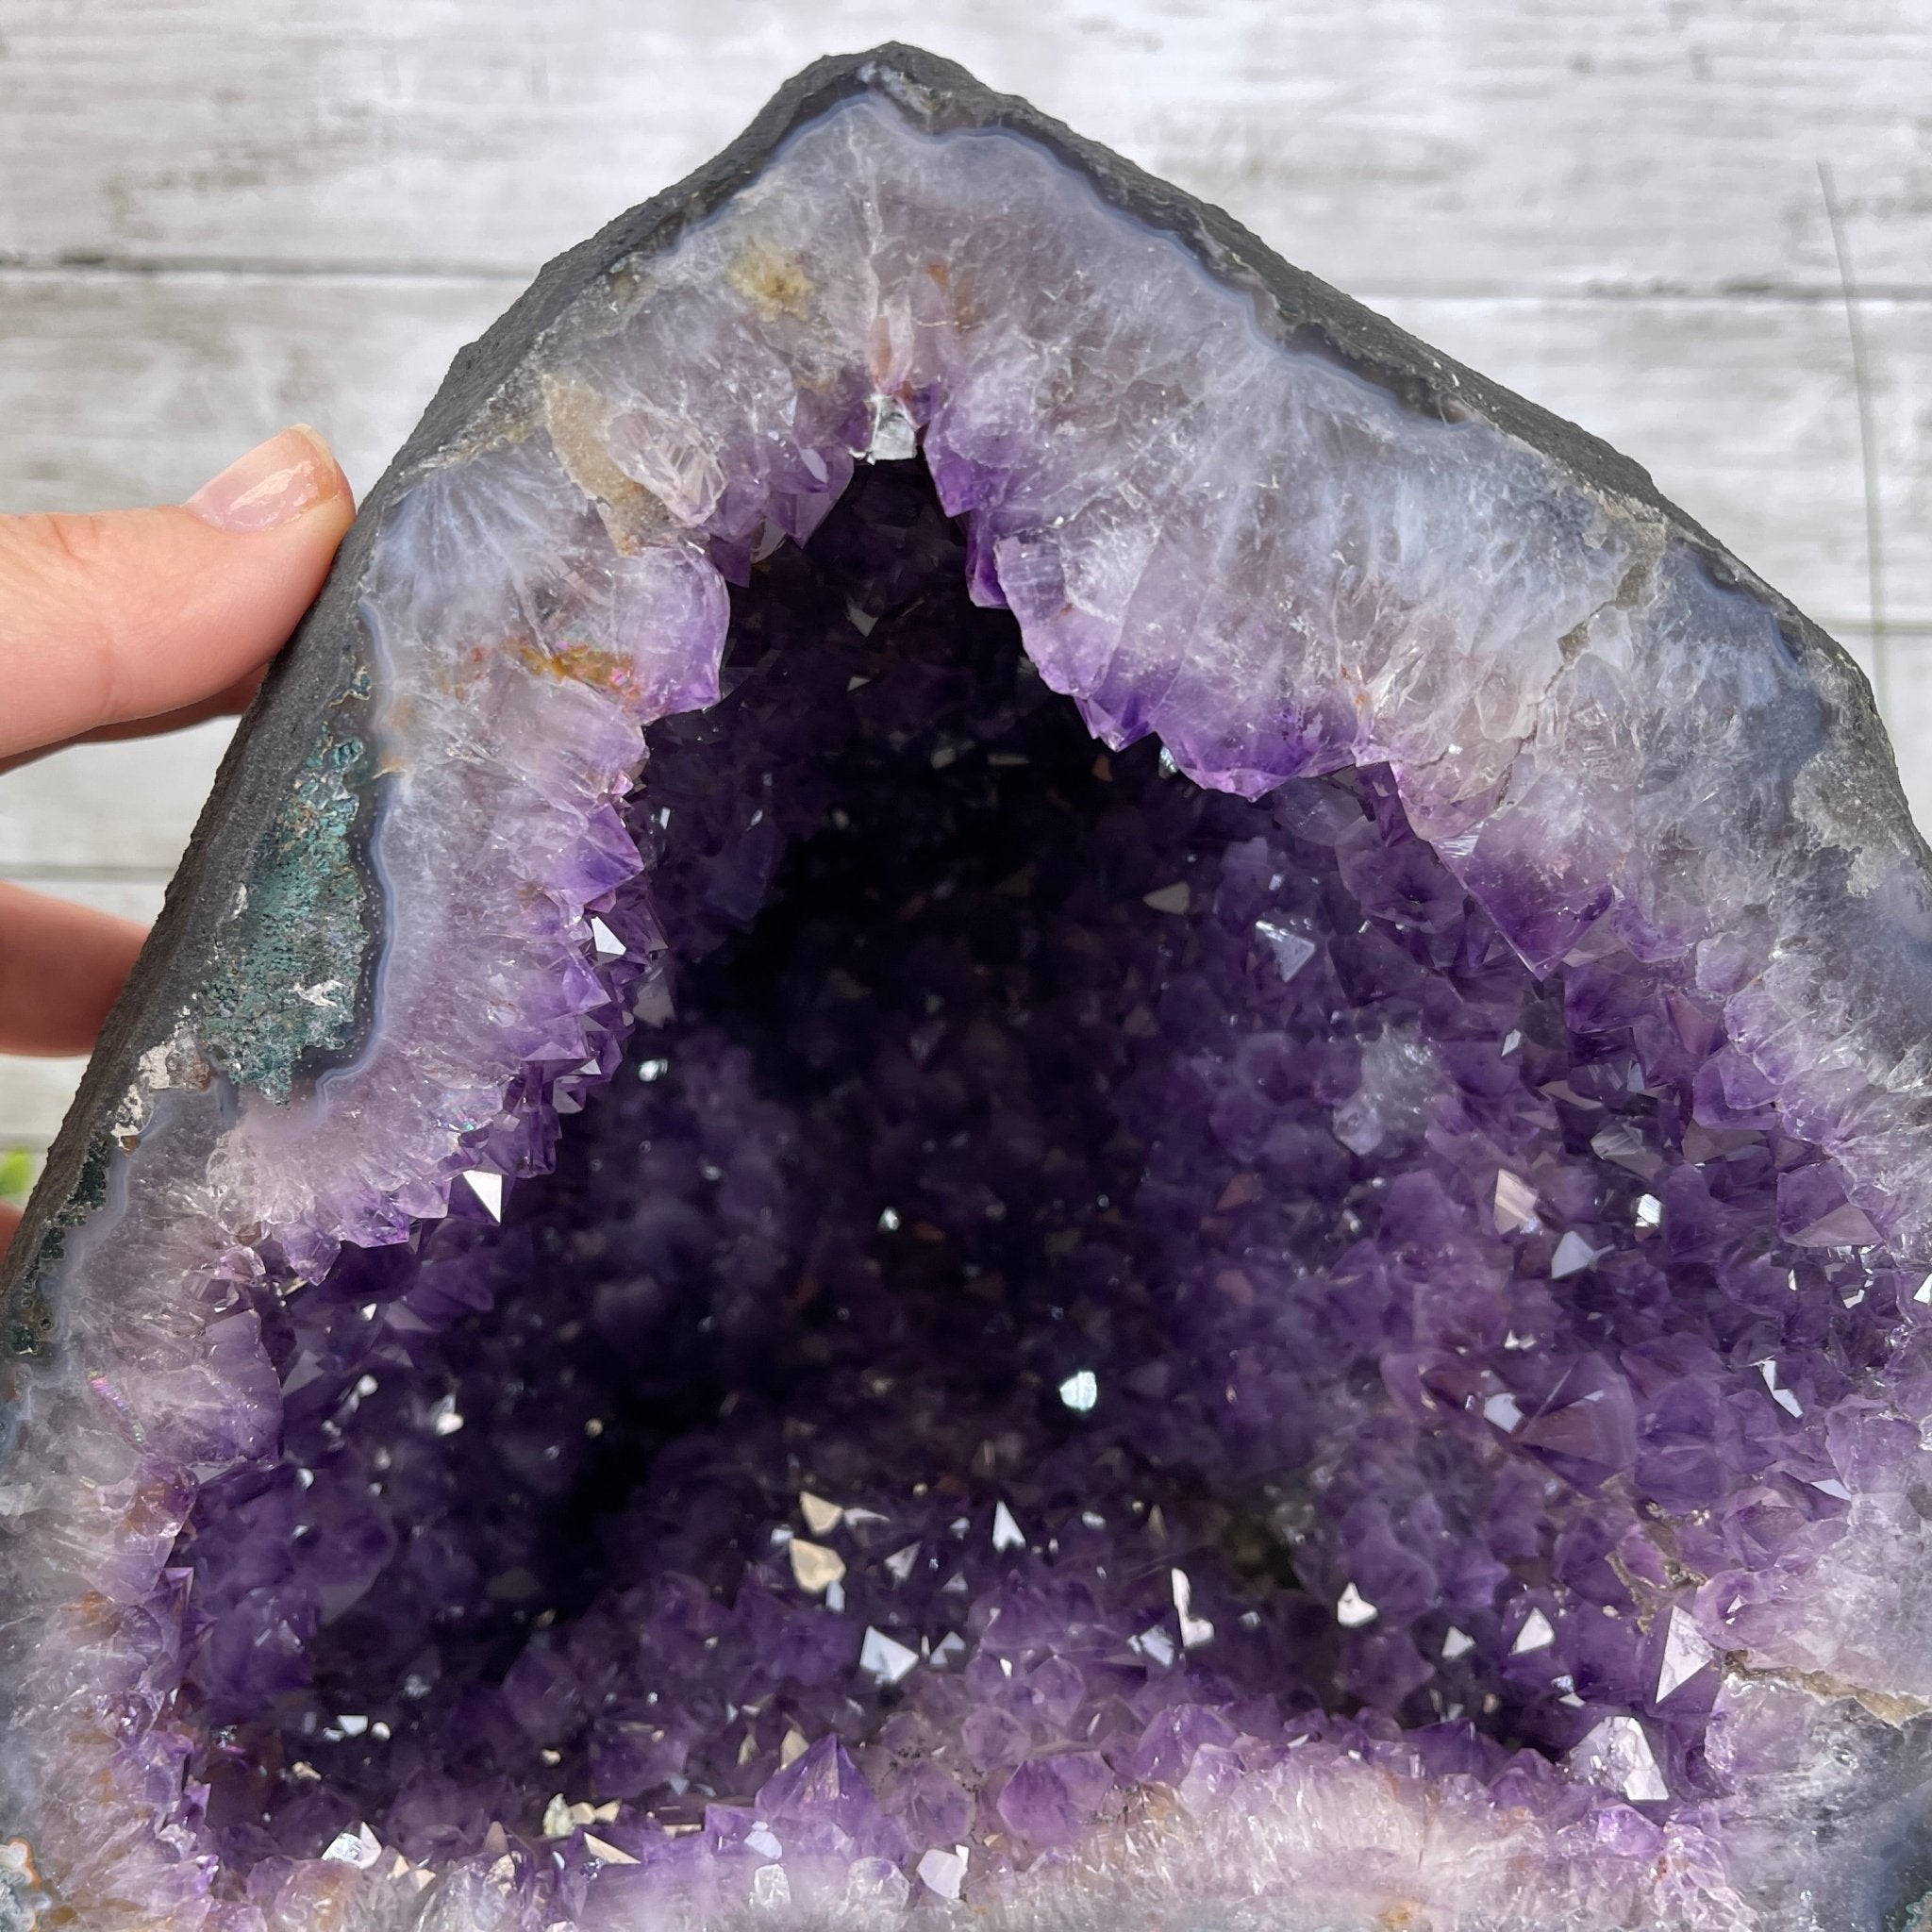 Extra Quality Brazilian Amethyst Cathedral, 10.2” tall & 30.5 lbs #5601-0631 by Brazil Gems - Brazil GemsBrazil GemsExtra Quality Brazilian Amethyst Cathedral, 10.2” tall & 30.5 lbs #5601-0631 by Brazil GemsCathedrals5601-0631